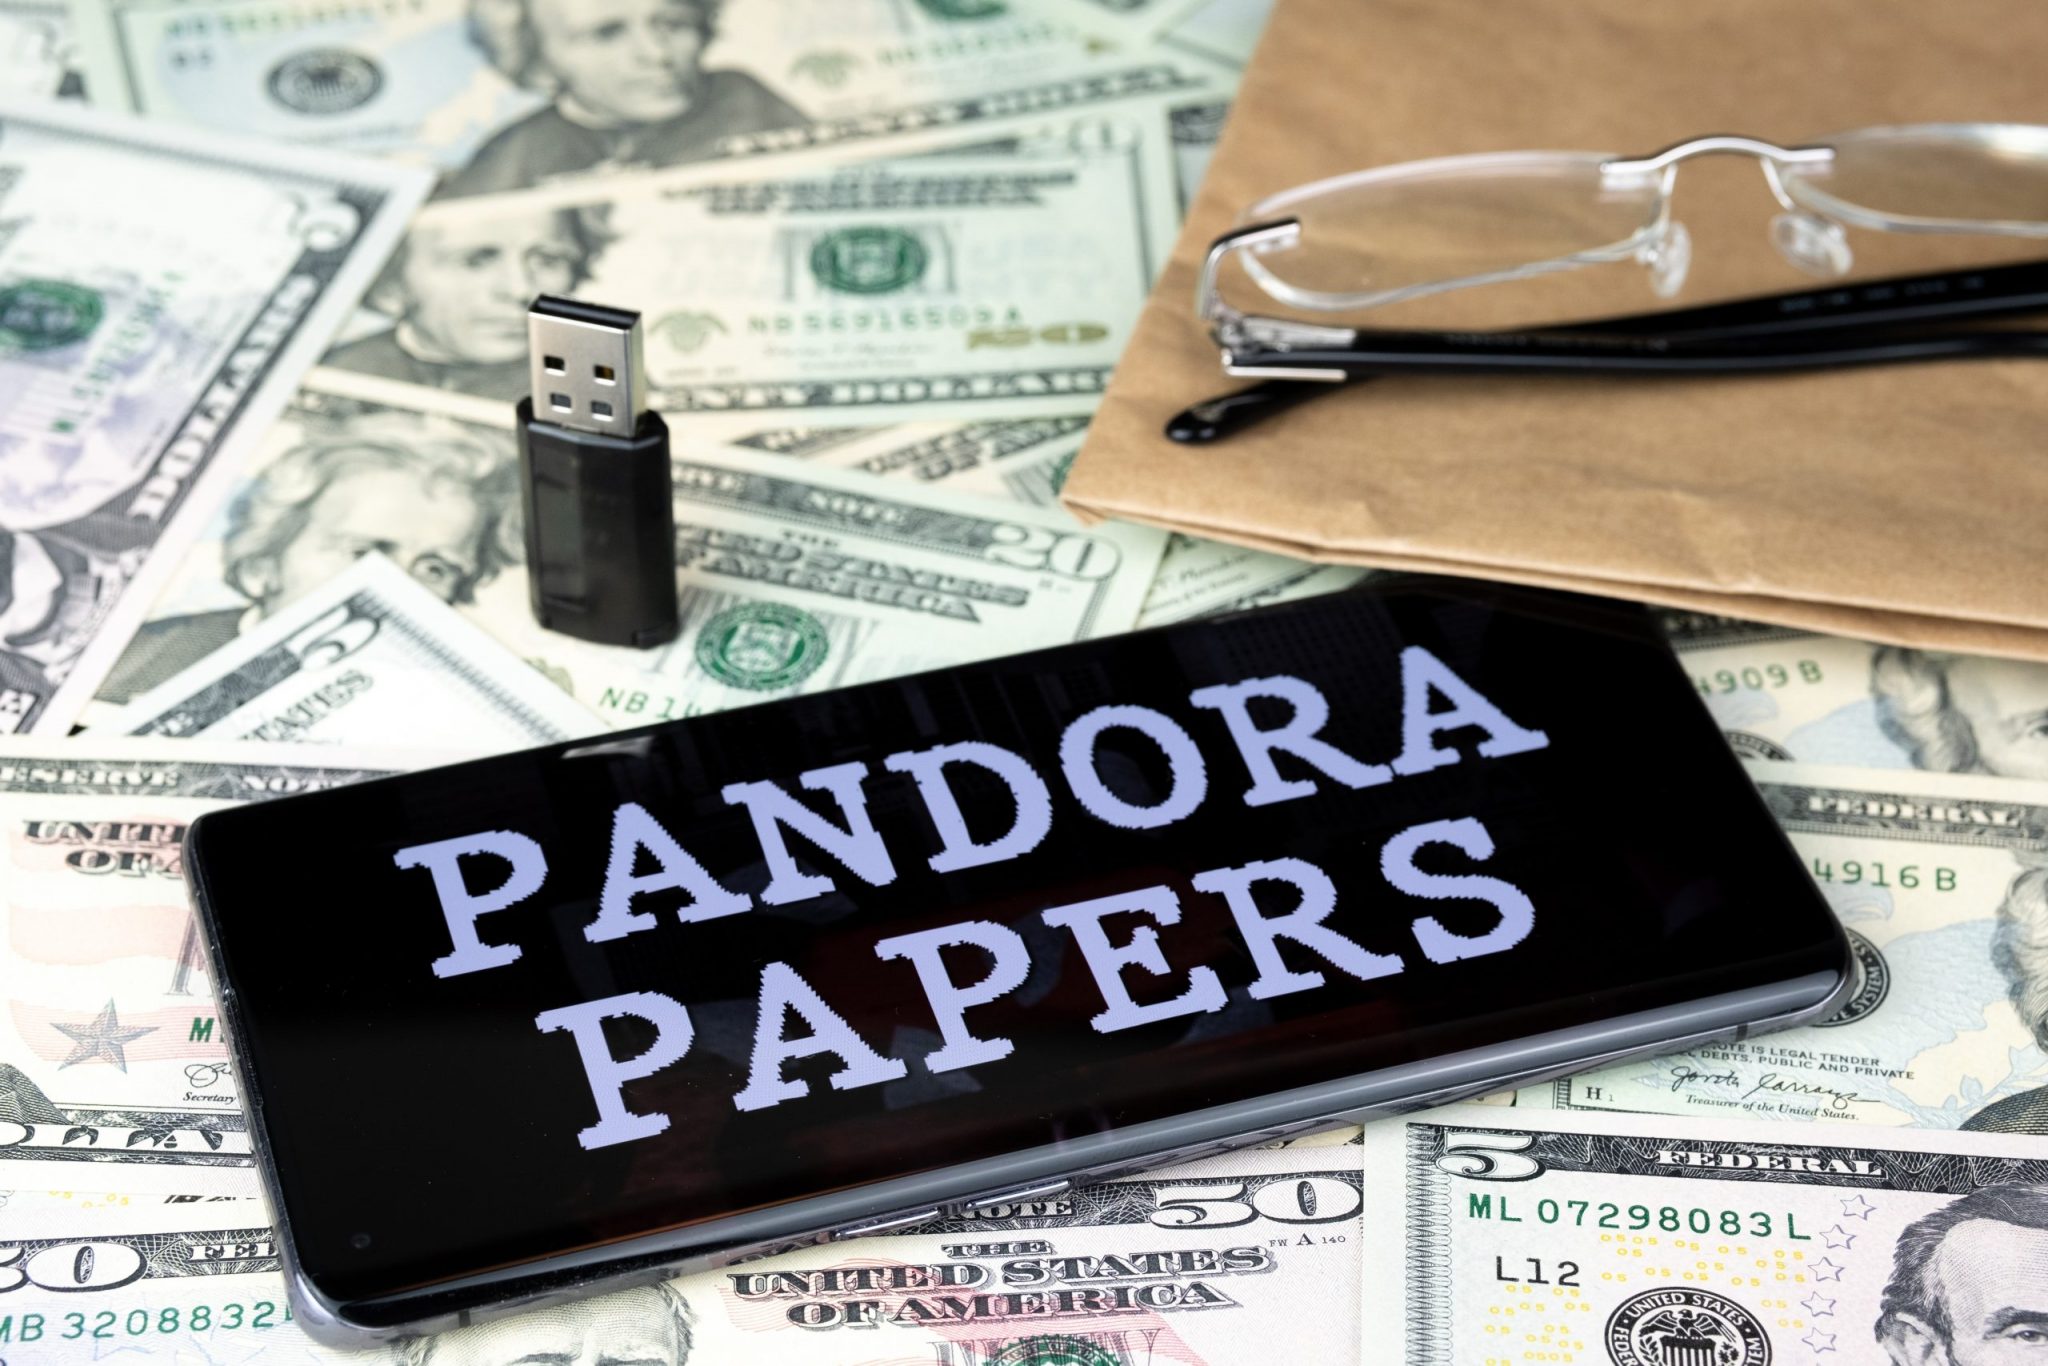 Pandora Papers on pile of money